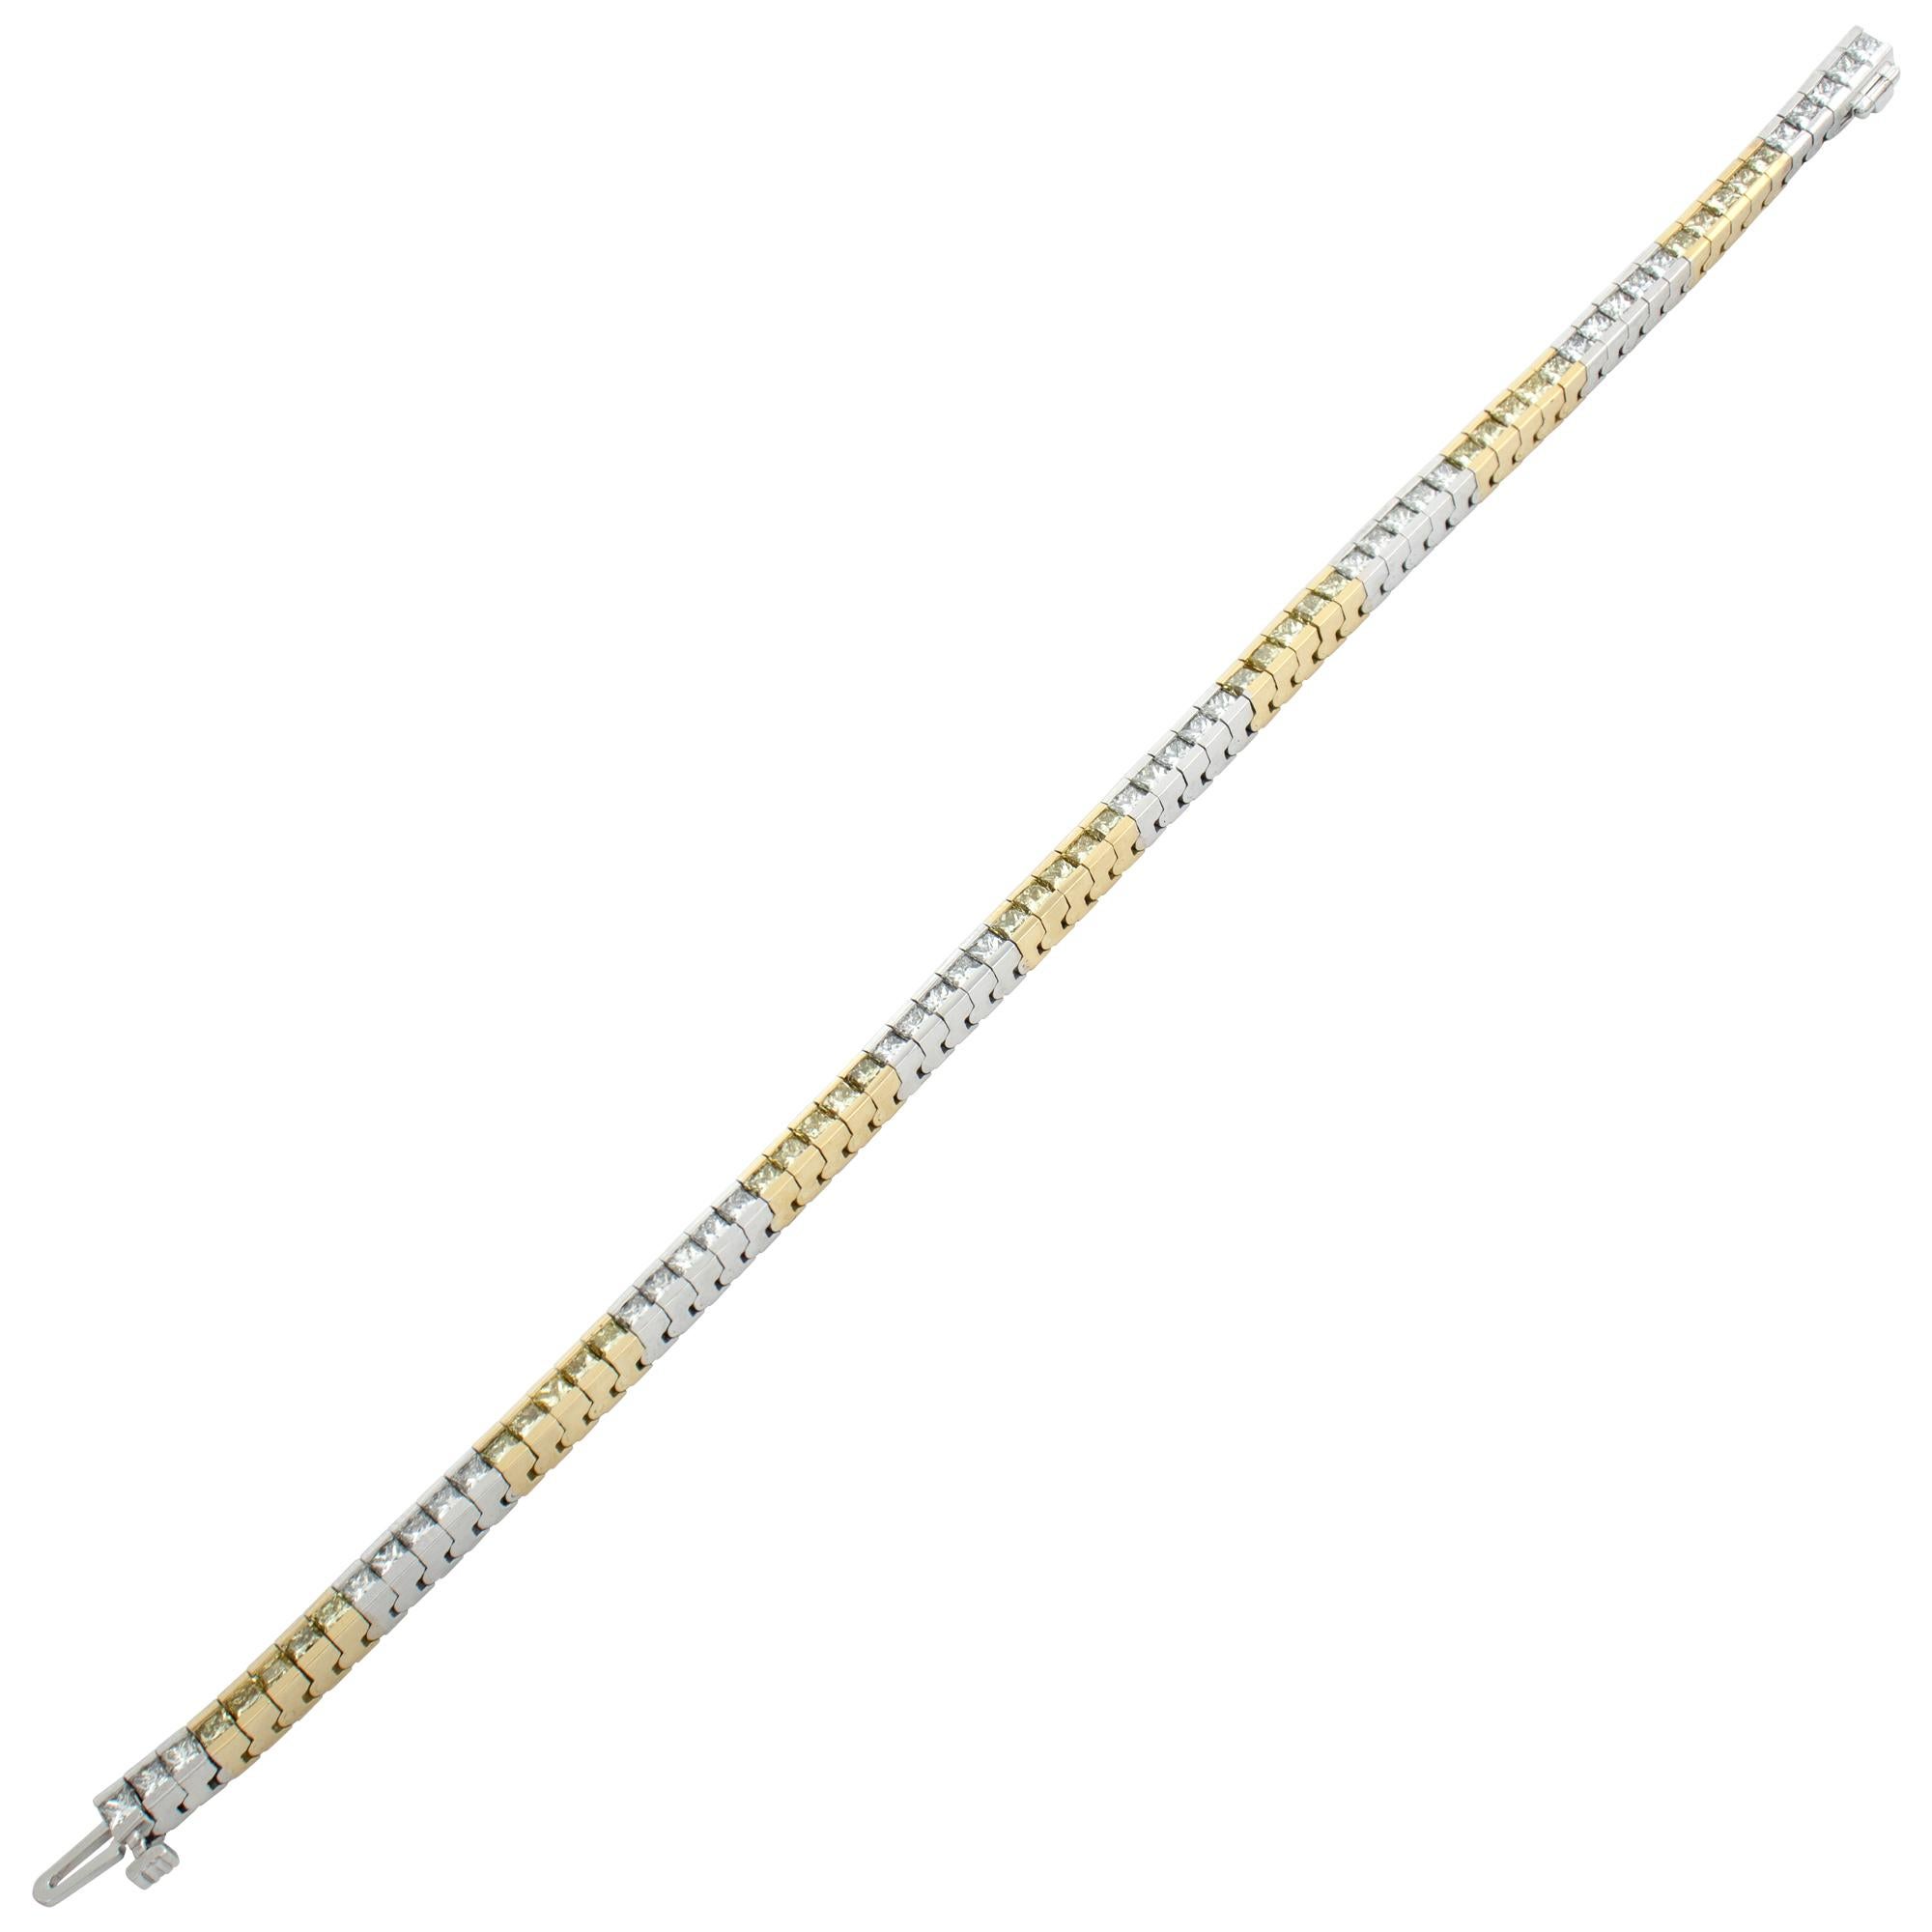 Women's White and yelllow gold bracelet with white and yellow diamonds. For Sale